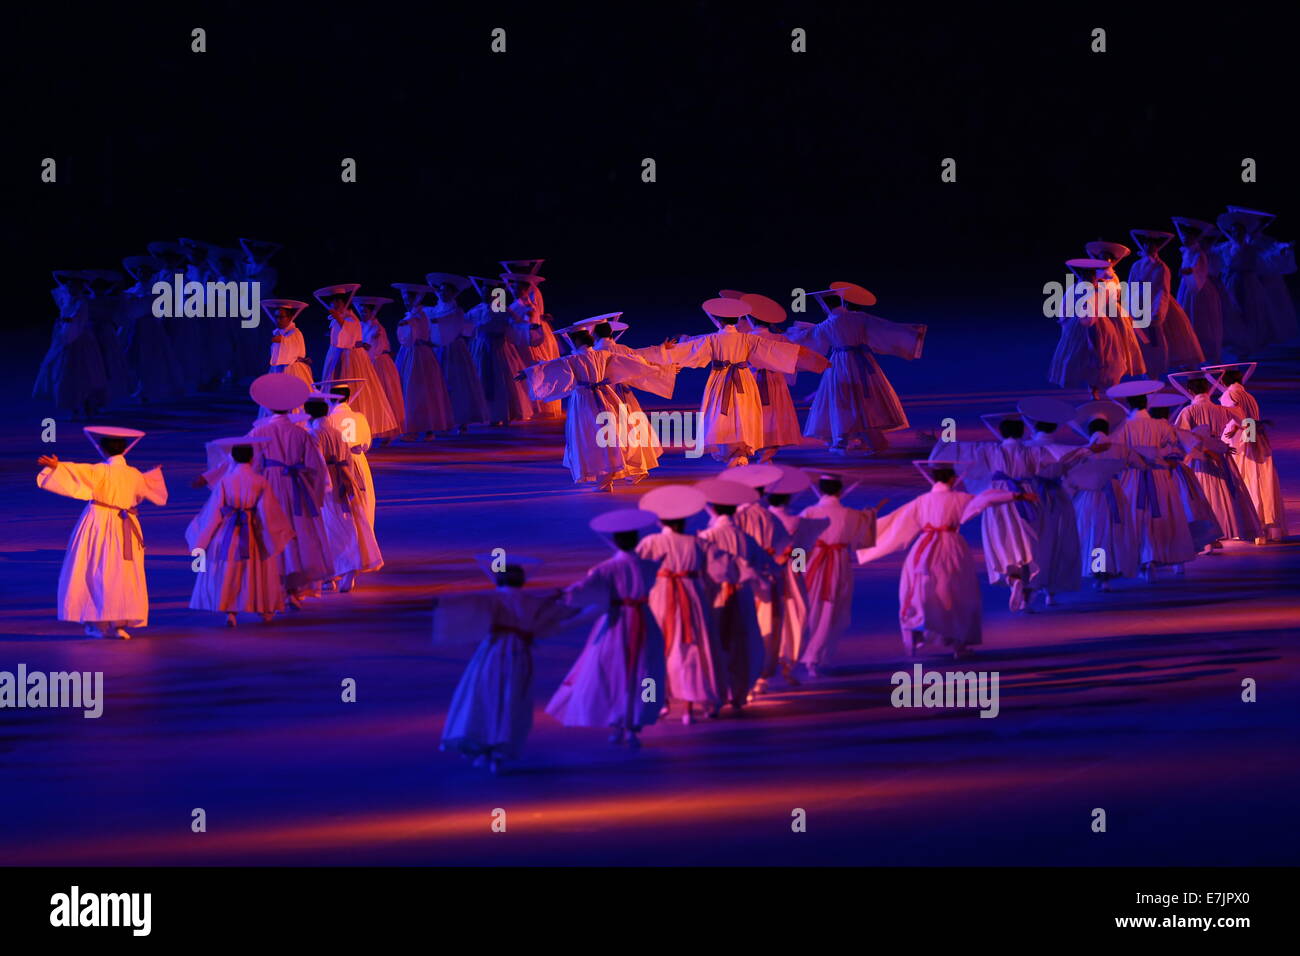 Incheon, South Korea. 19th Sep, 2014. Actors perform during the opening ceremony of the 17th Asian Games in Incheon, South Korea, Sept. 19, 2014. Credit:  Fei Maohua/Xinhua/Alamy Live News Stock Photo